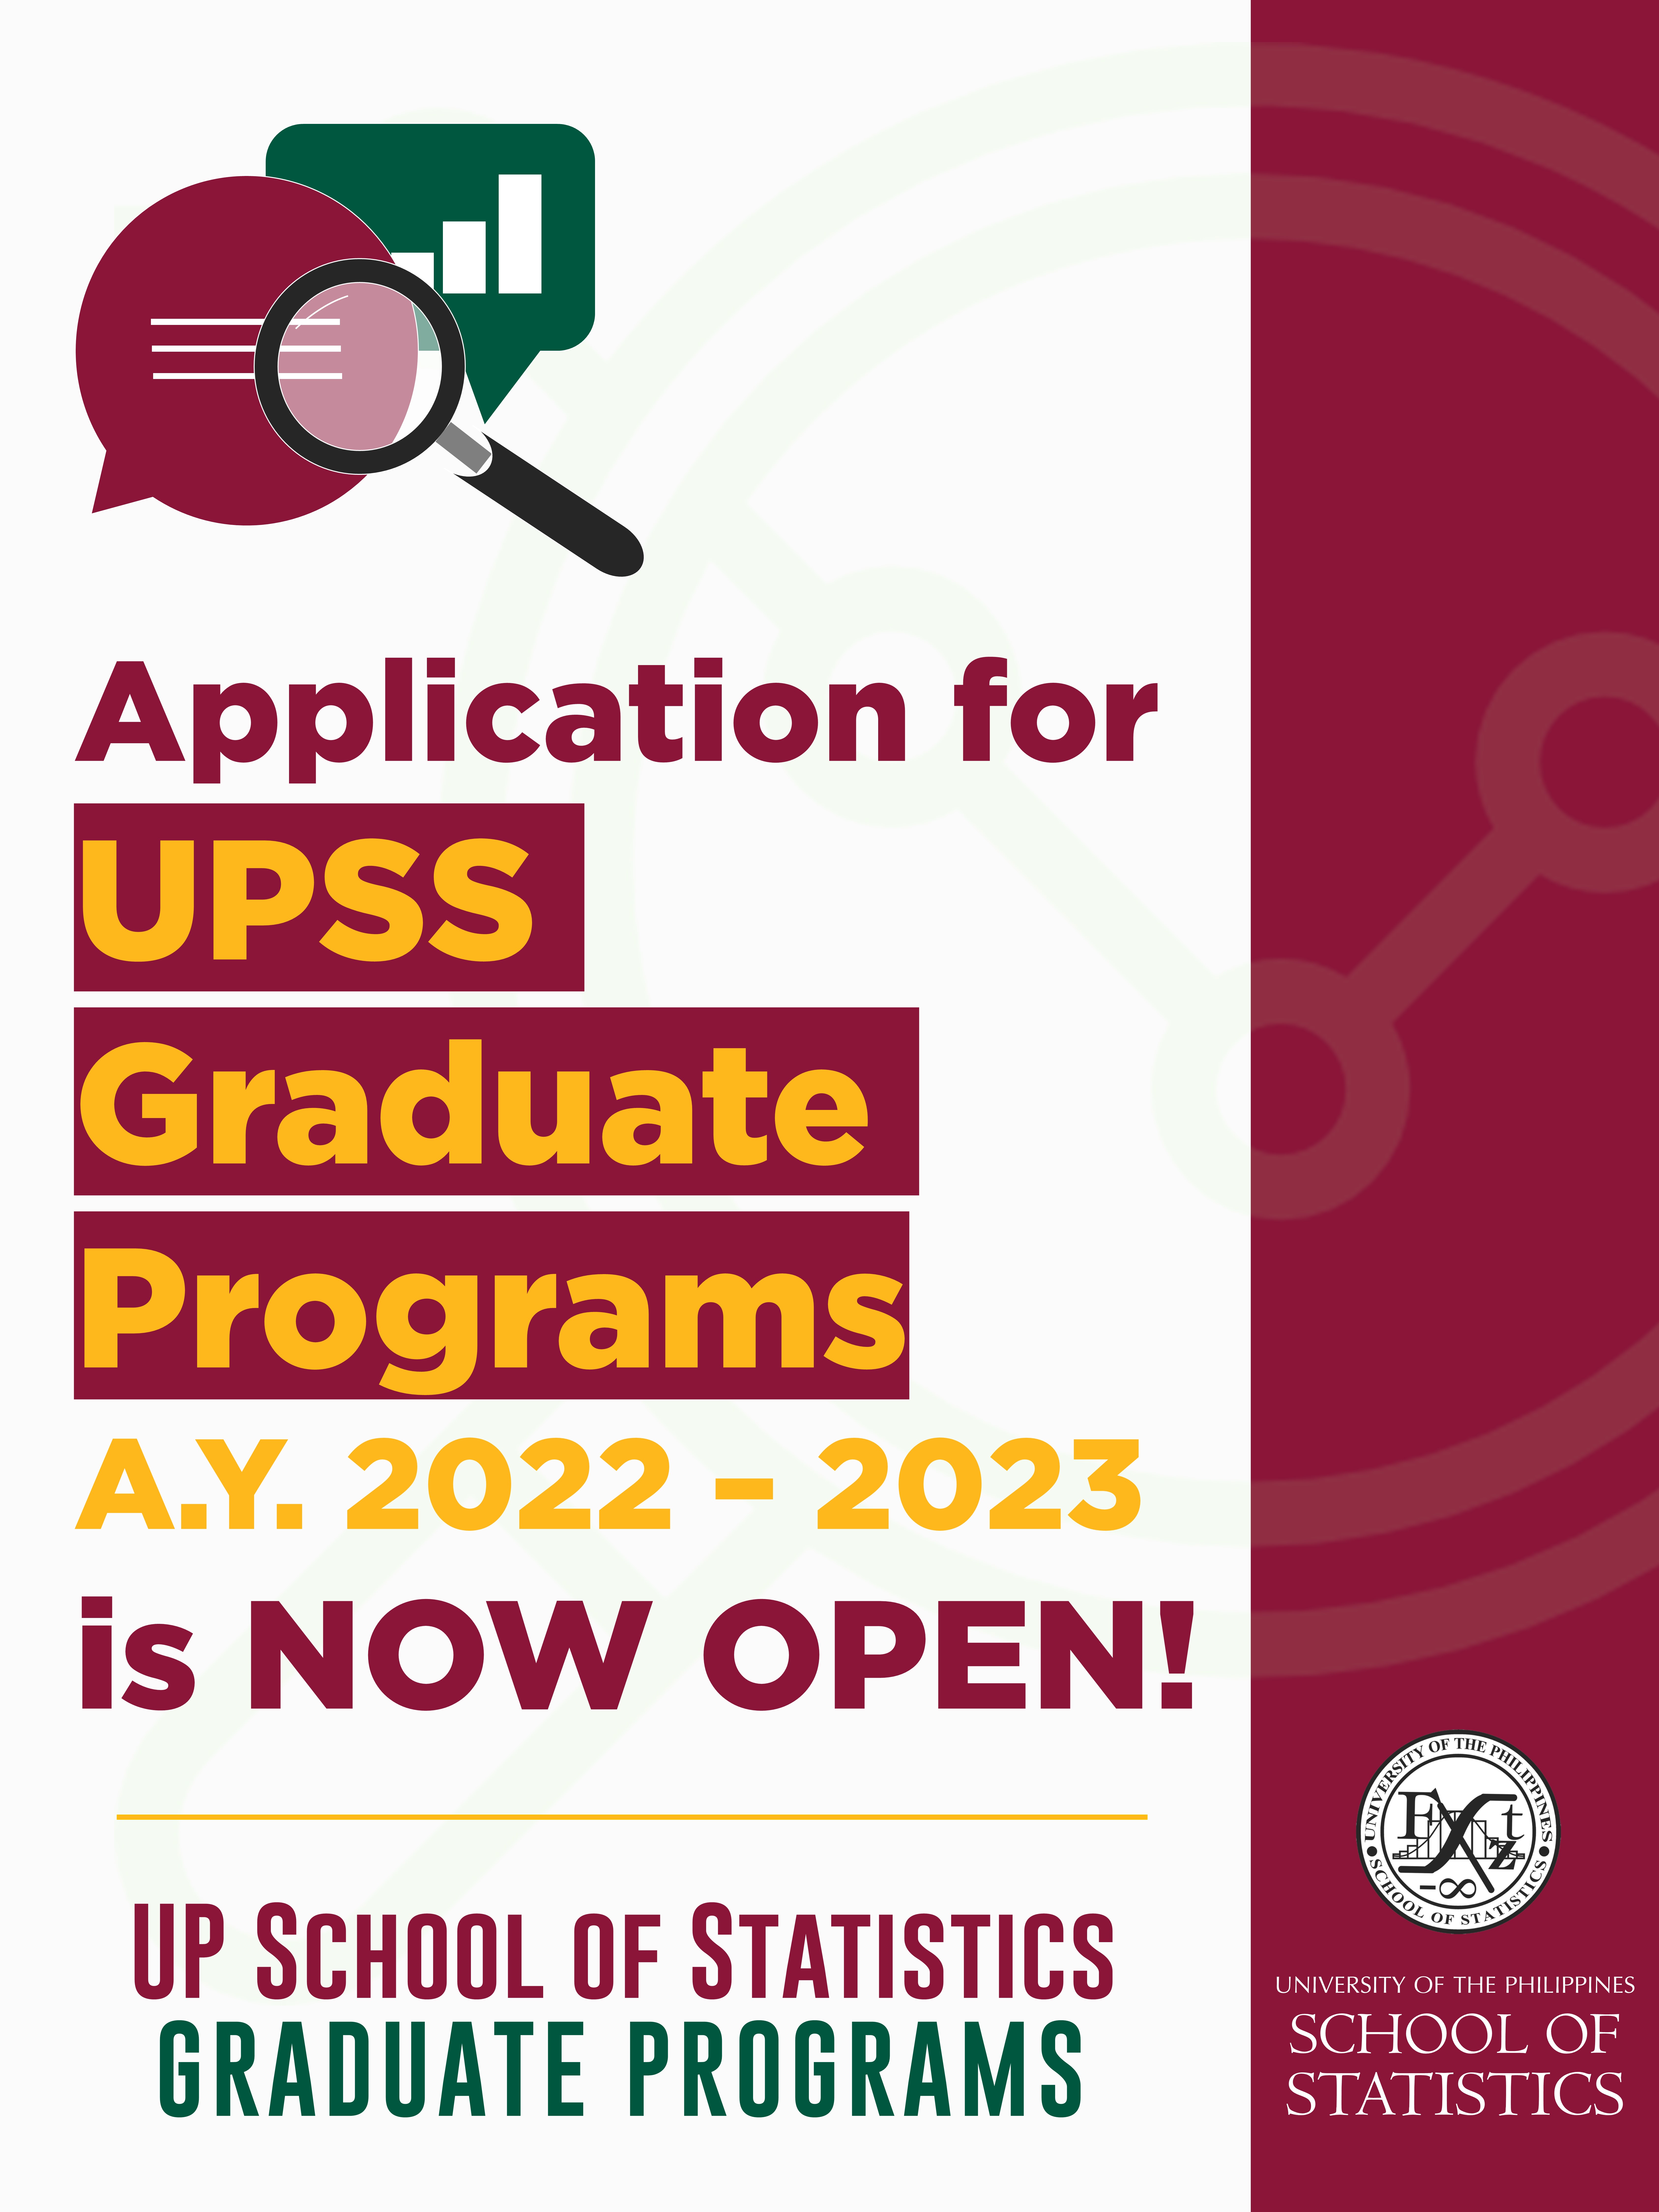 Image for Application for UPSS Graduate Programs A.Y. 2022 – 2023 is NOW OPEN!